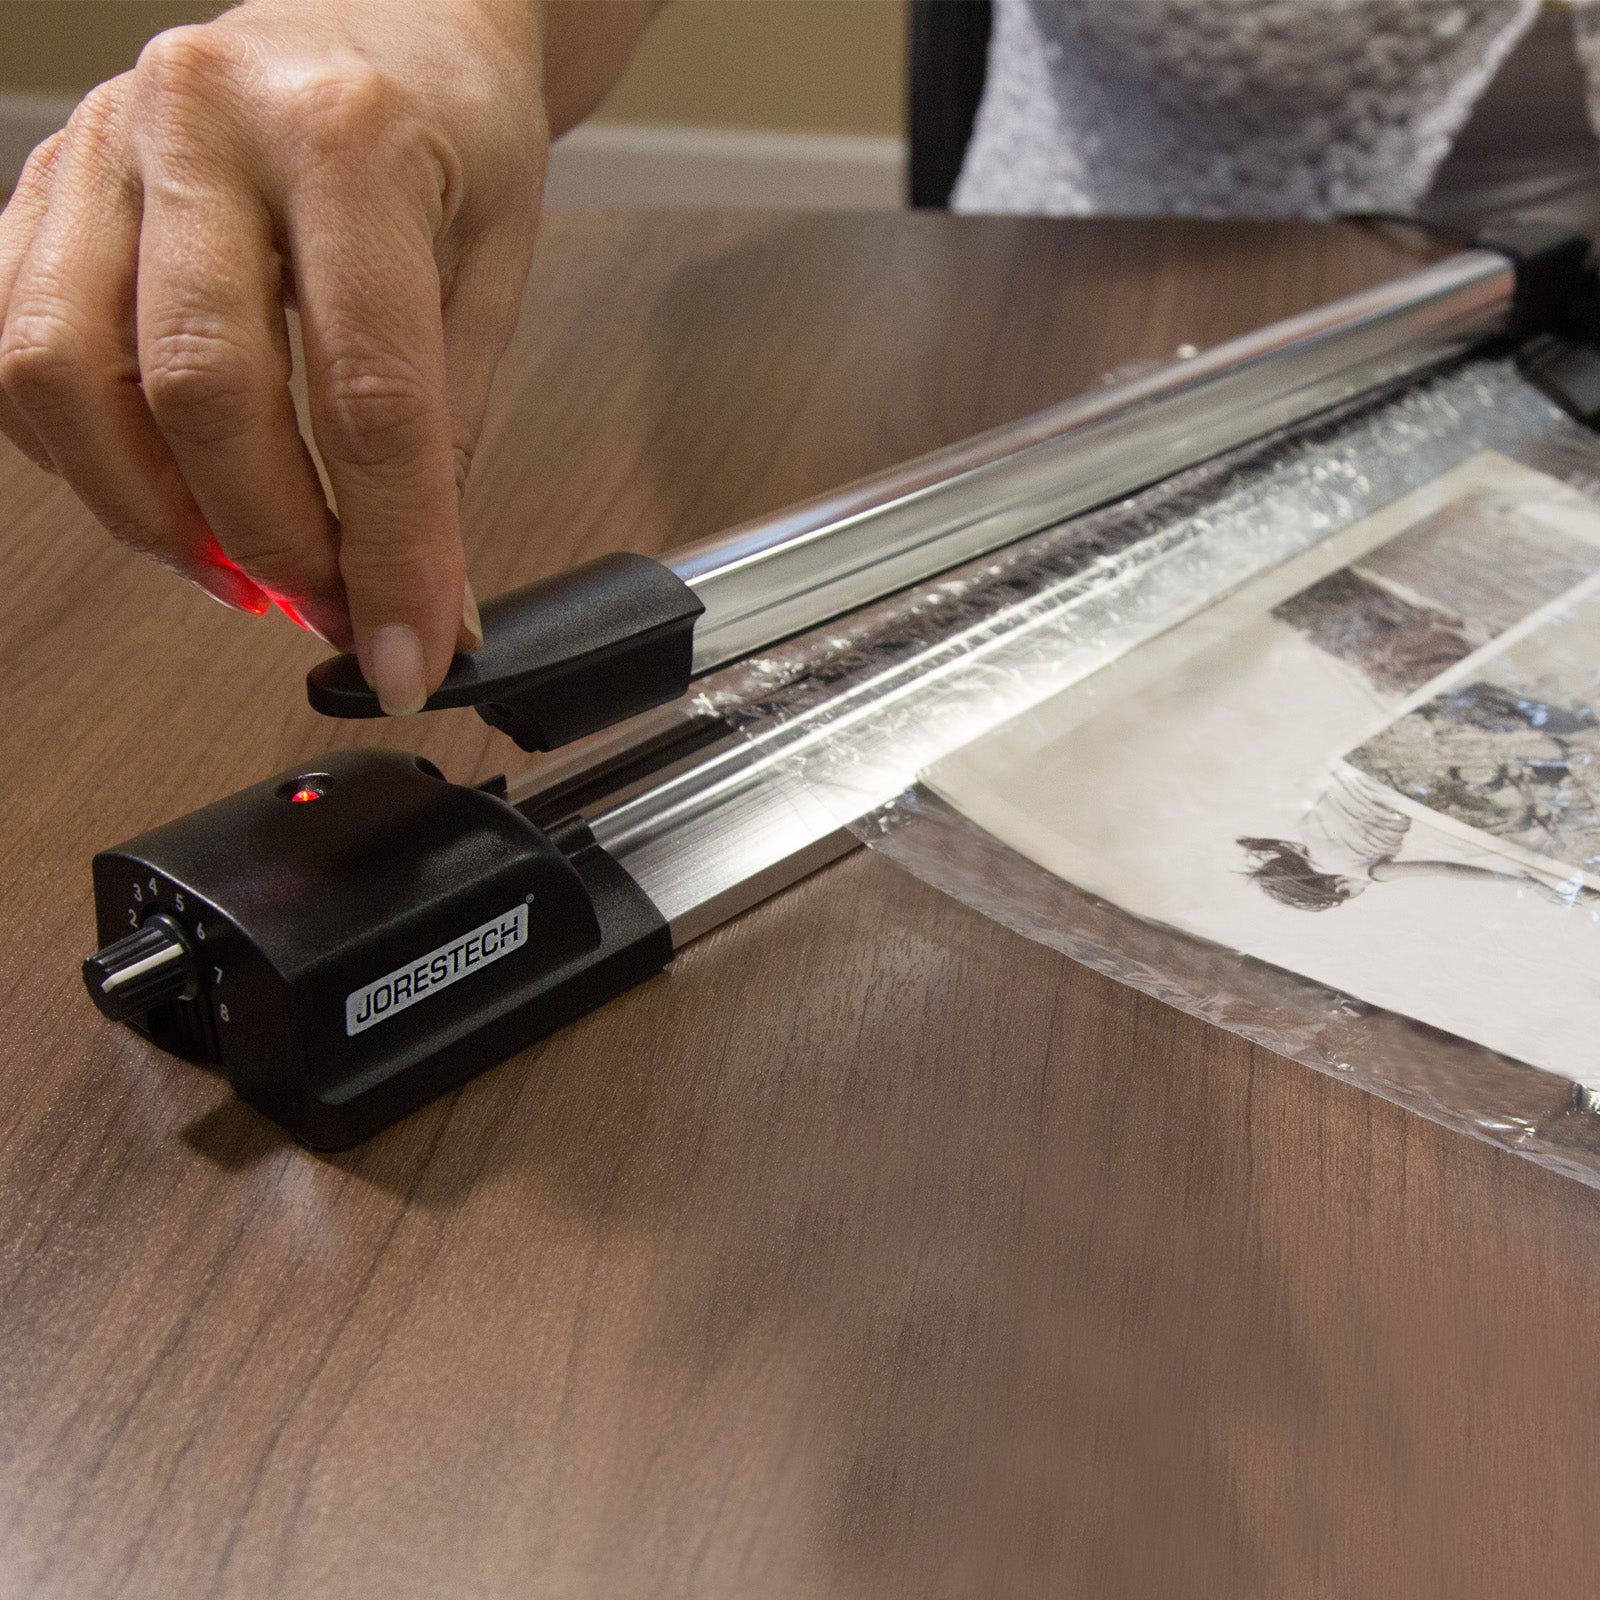 Manual Impulse sealer in action, sealing a bundle of documents inside of a plastic bag. Red light indicator is on, signaling that the bag sealer is currently sealing a bag